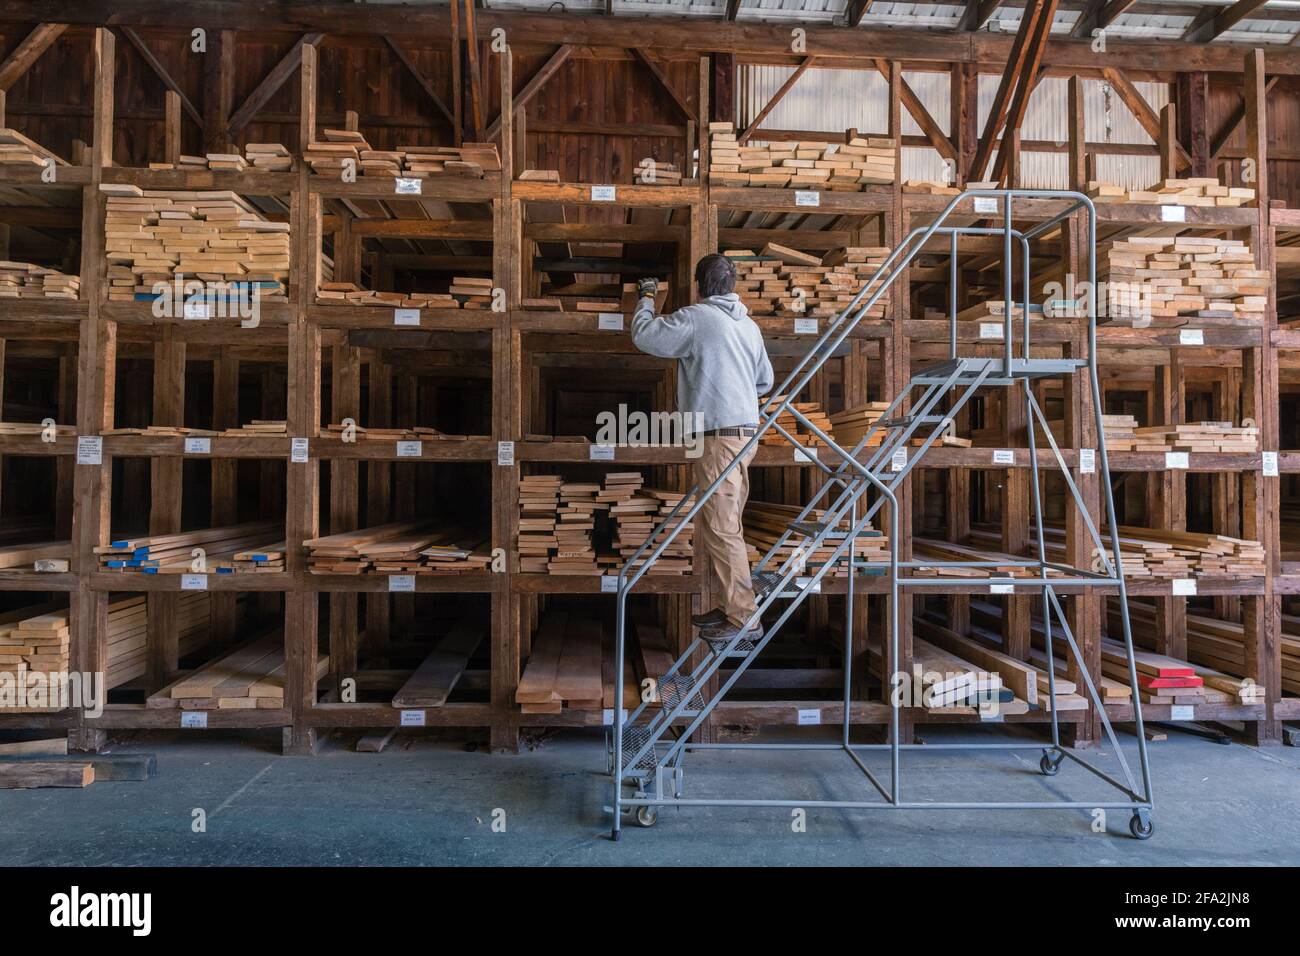 Kingston, NH, US-March 12, 2021: Man choosing wood among stacks of lumber on a rack for sale to consumers at a retail hardwood lumber business Stock Photo